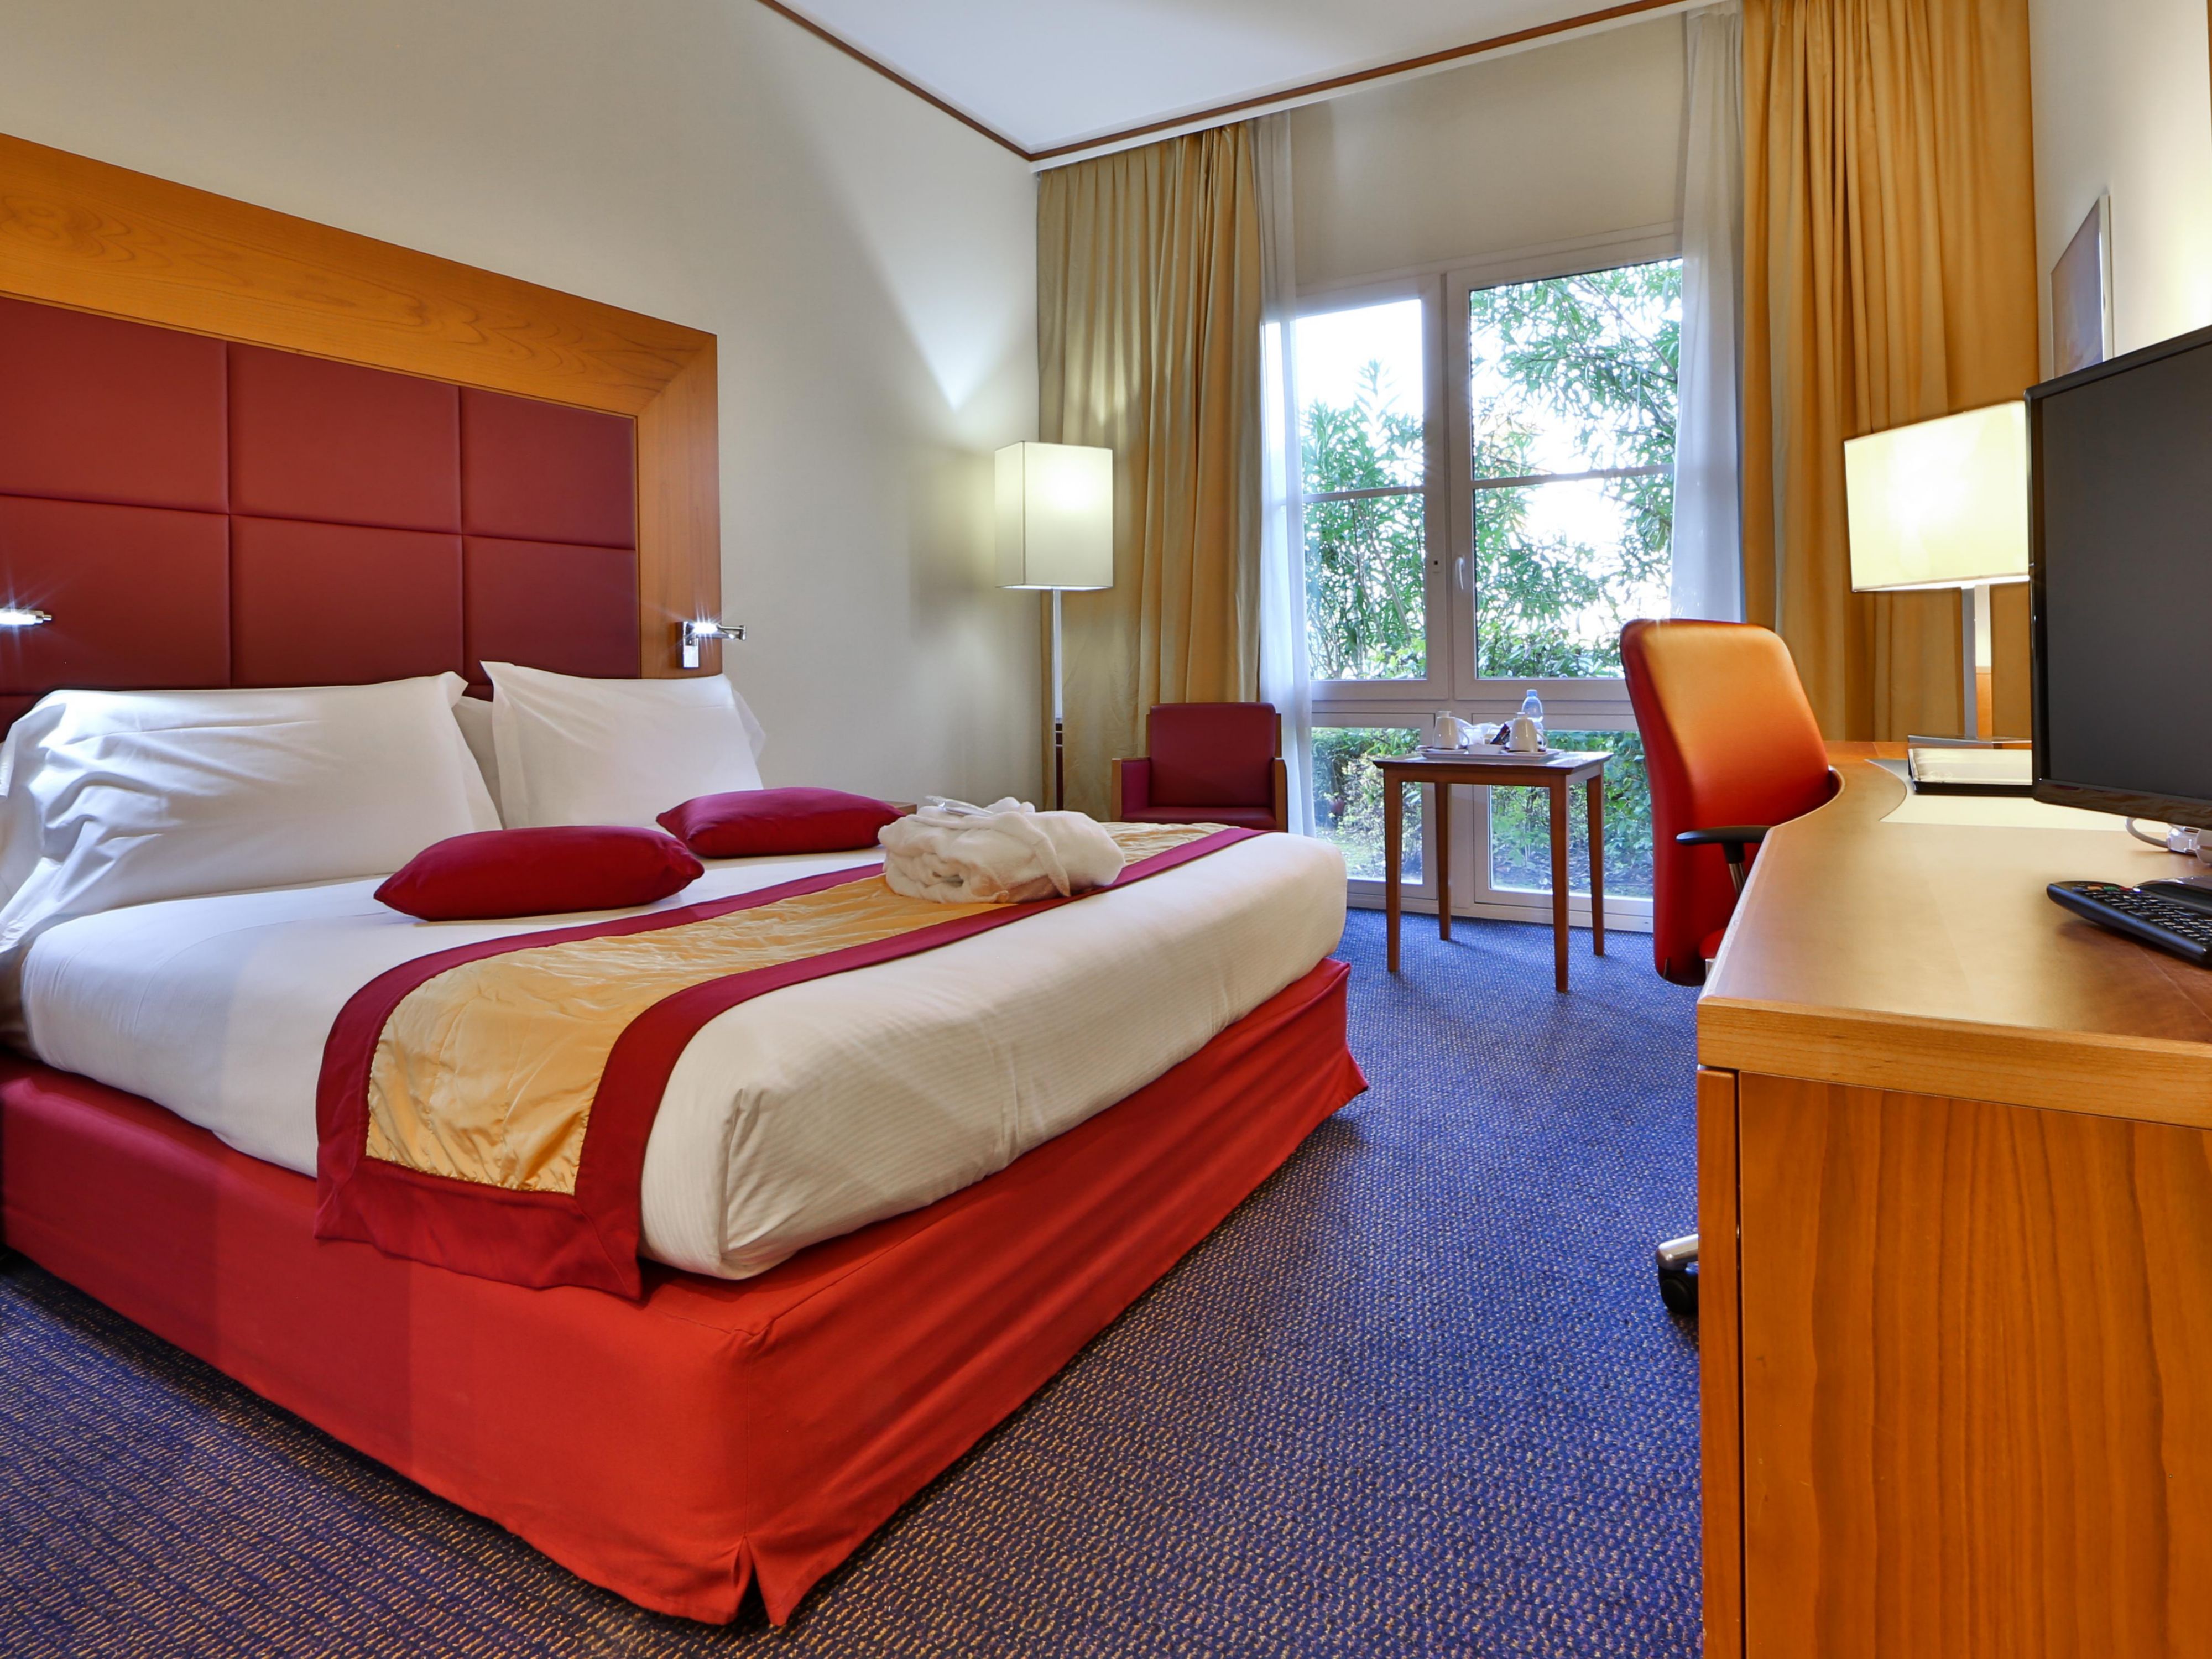 Relax in our superior rooms with plush king bed